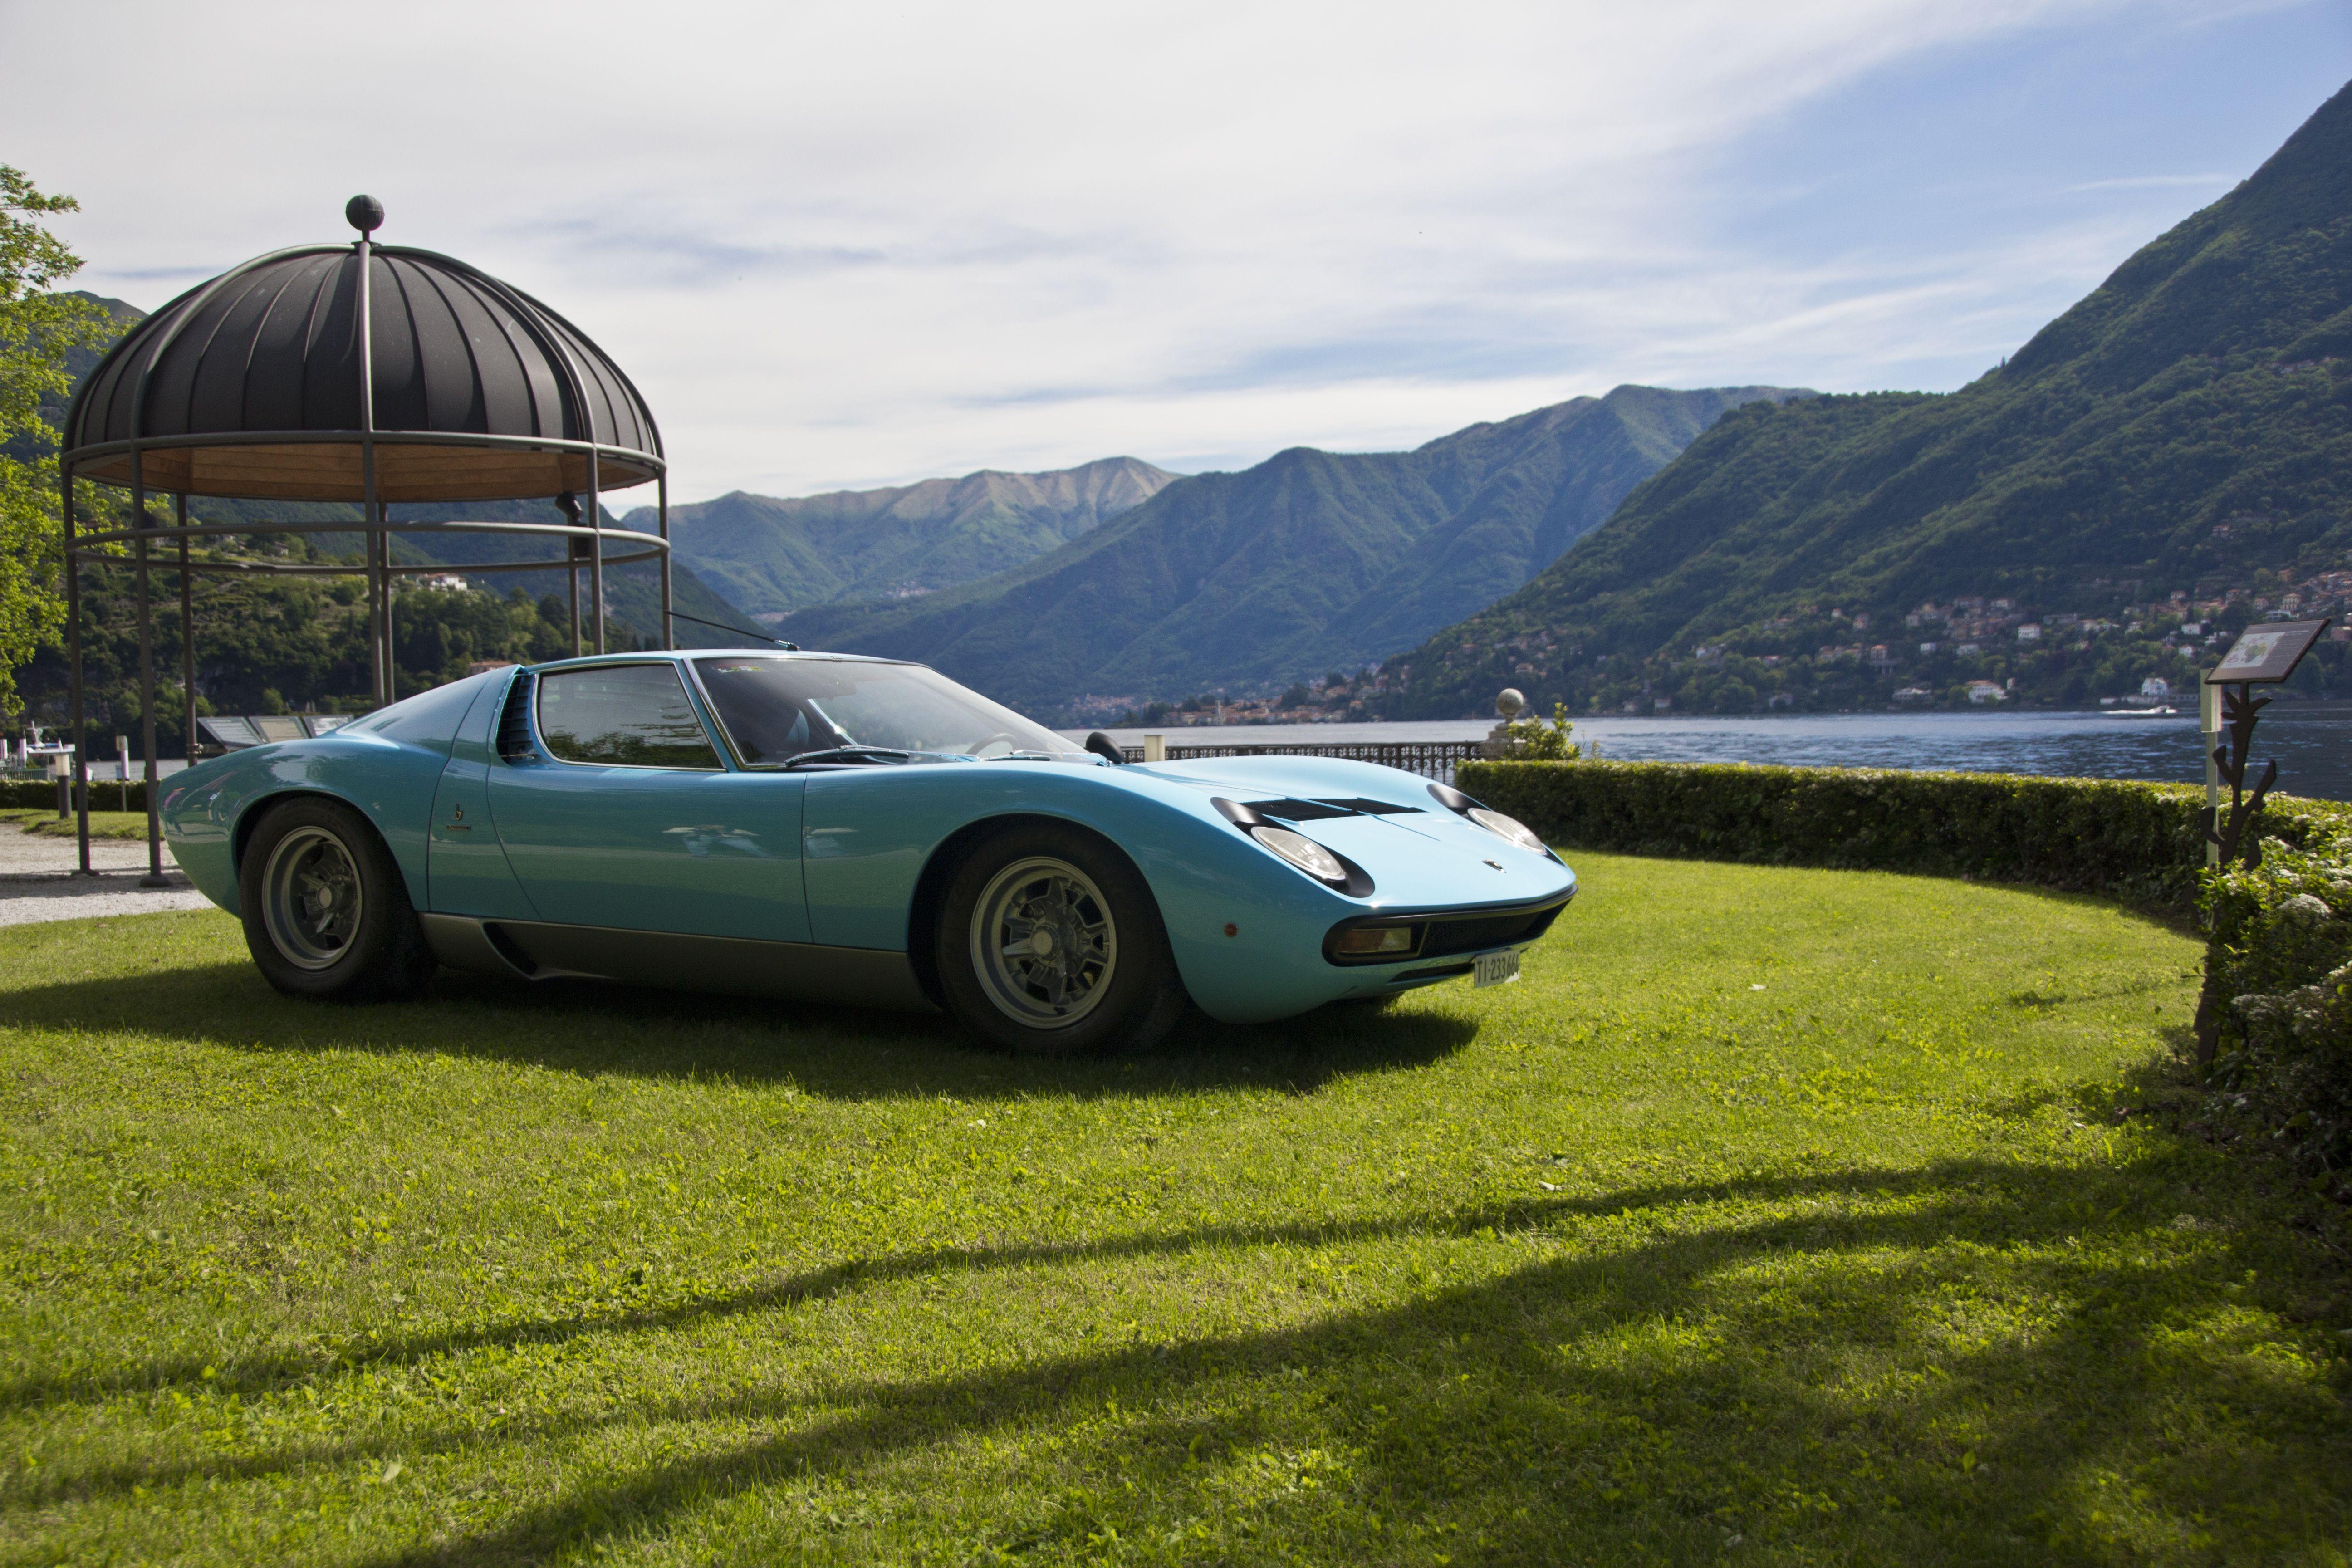 Your Ridiculously Awesome Lamborghini Miura Wallpaper Is Here